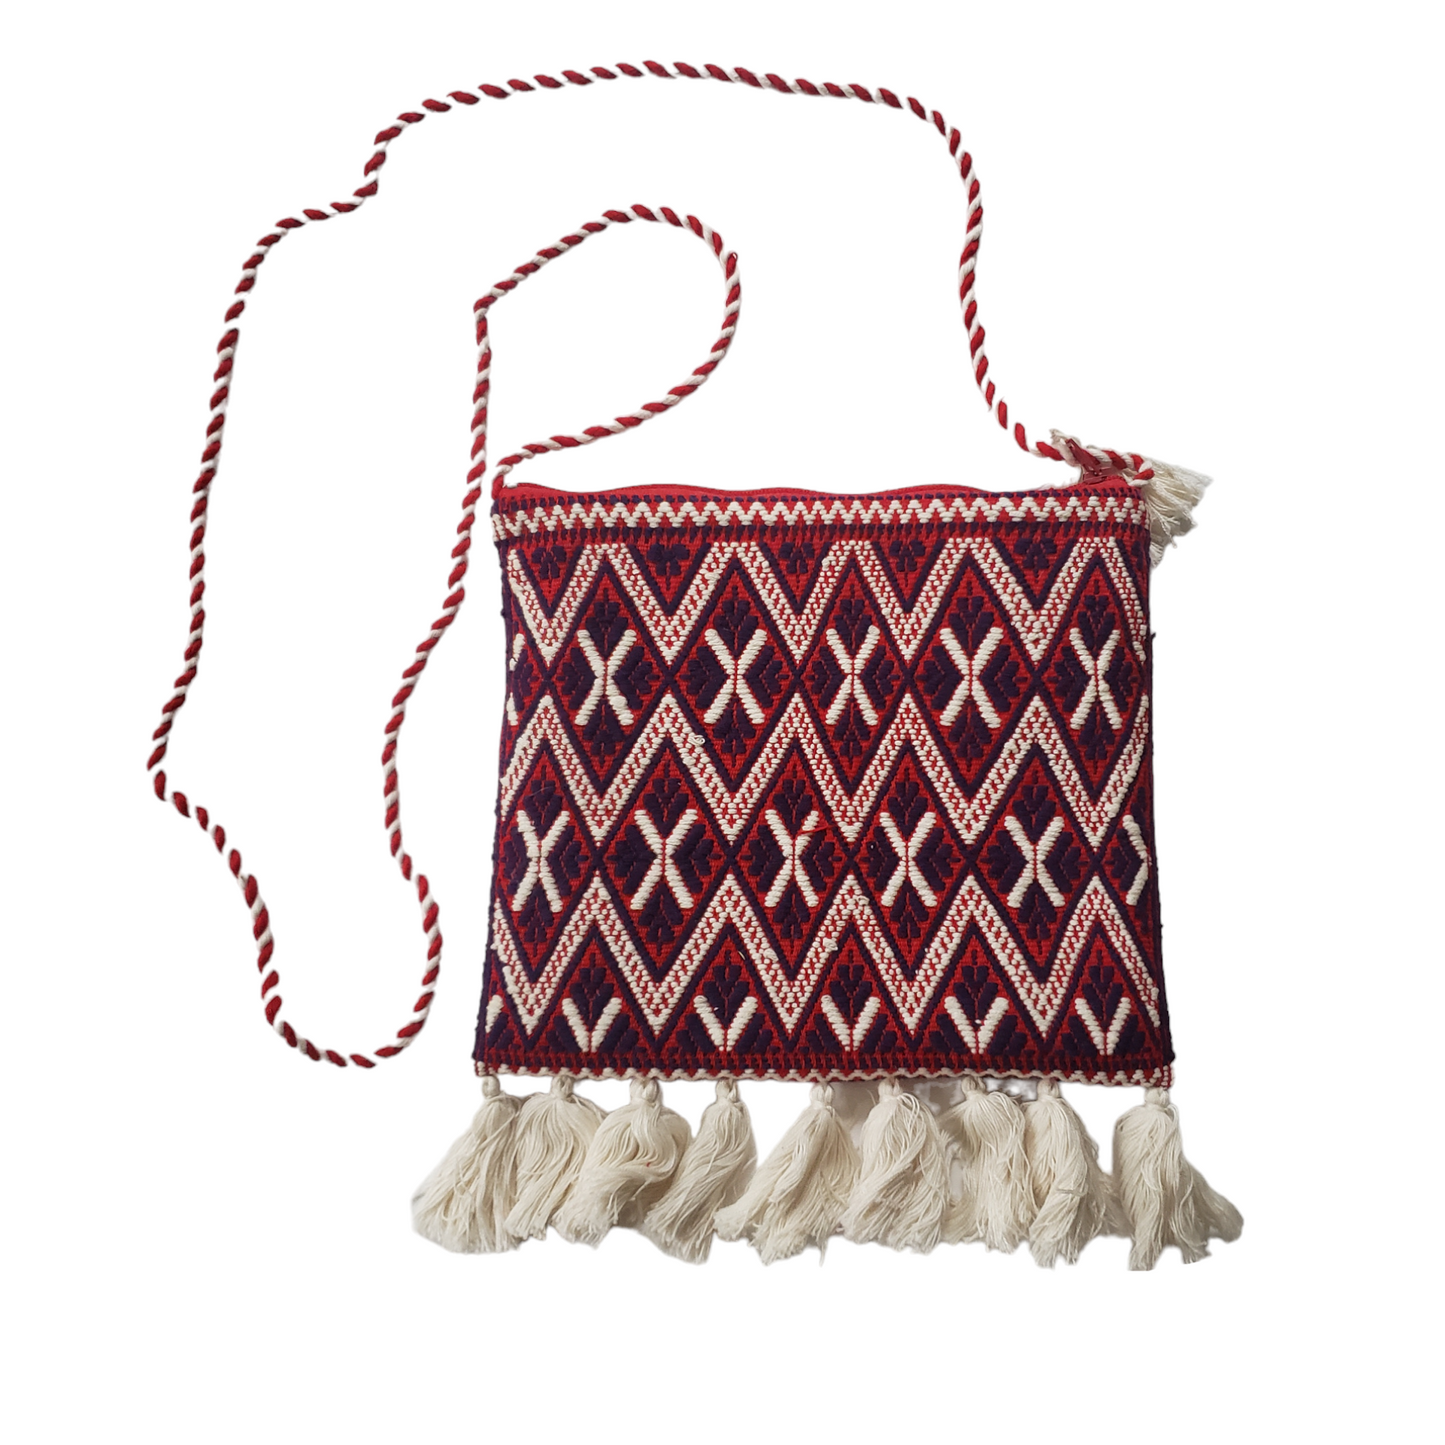 Embroidered Purse from Chiapas Mexico